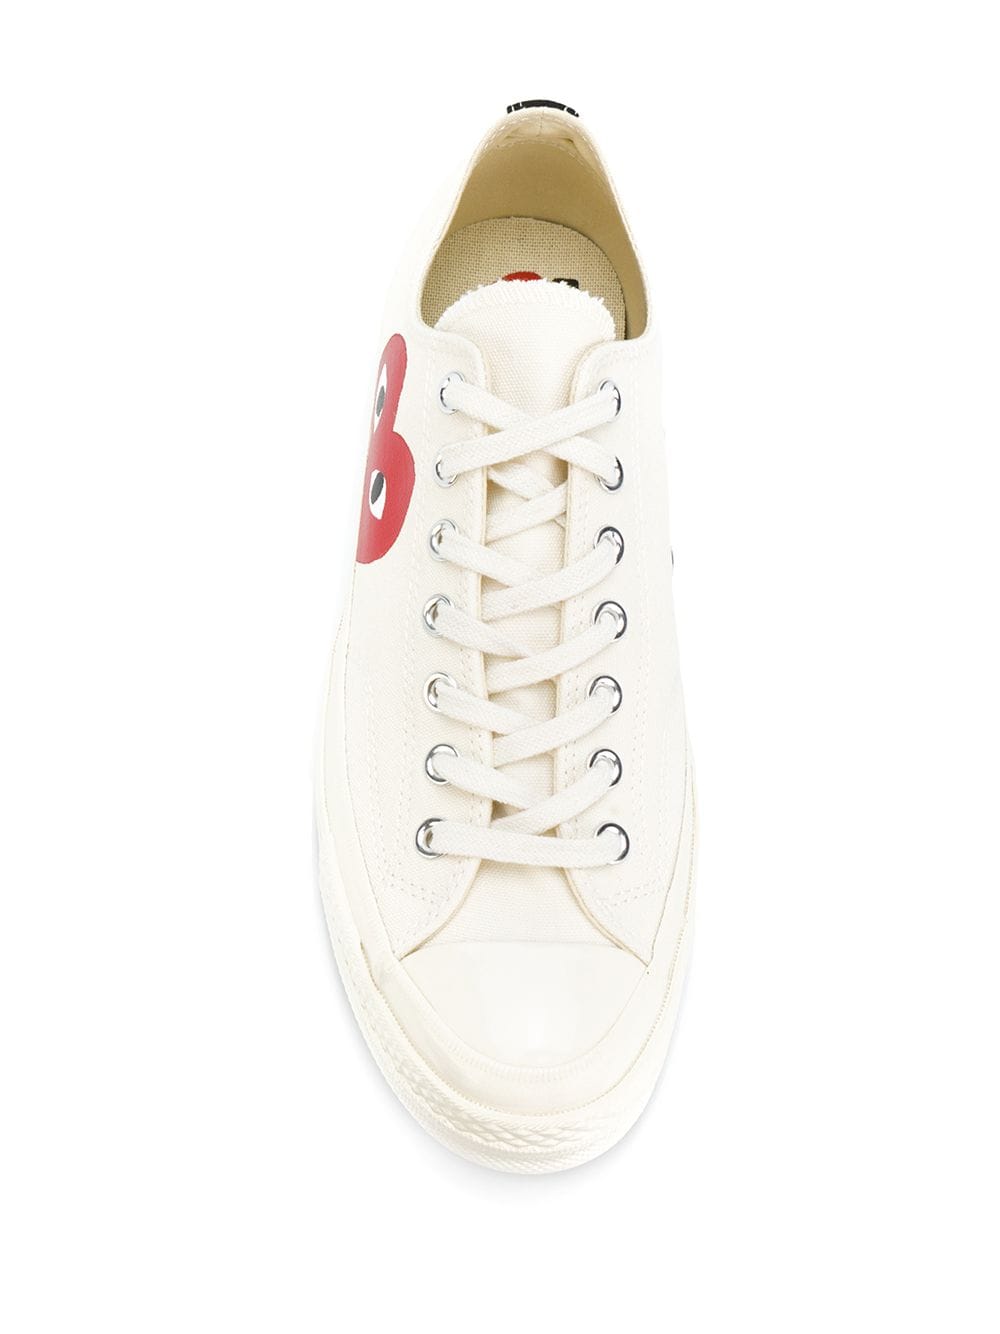 COMME DES GARCONS PLAY X CONVERSE CHUCK TAYLOR LOW TOP SNEAKERS